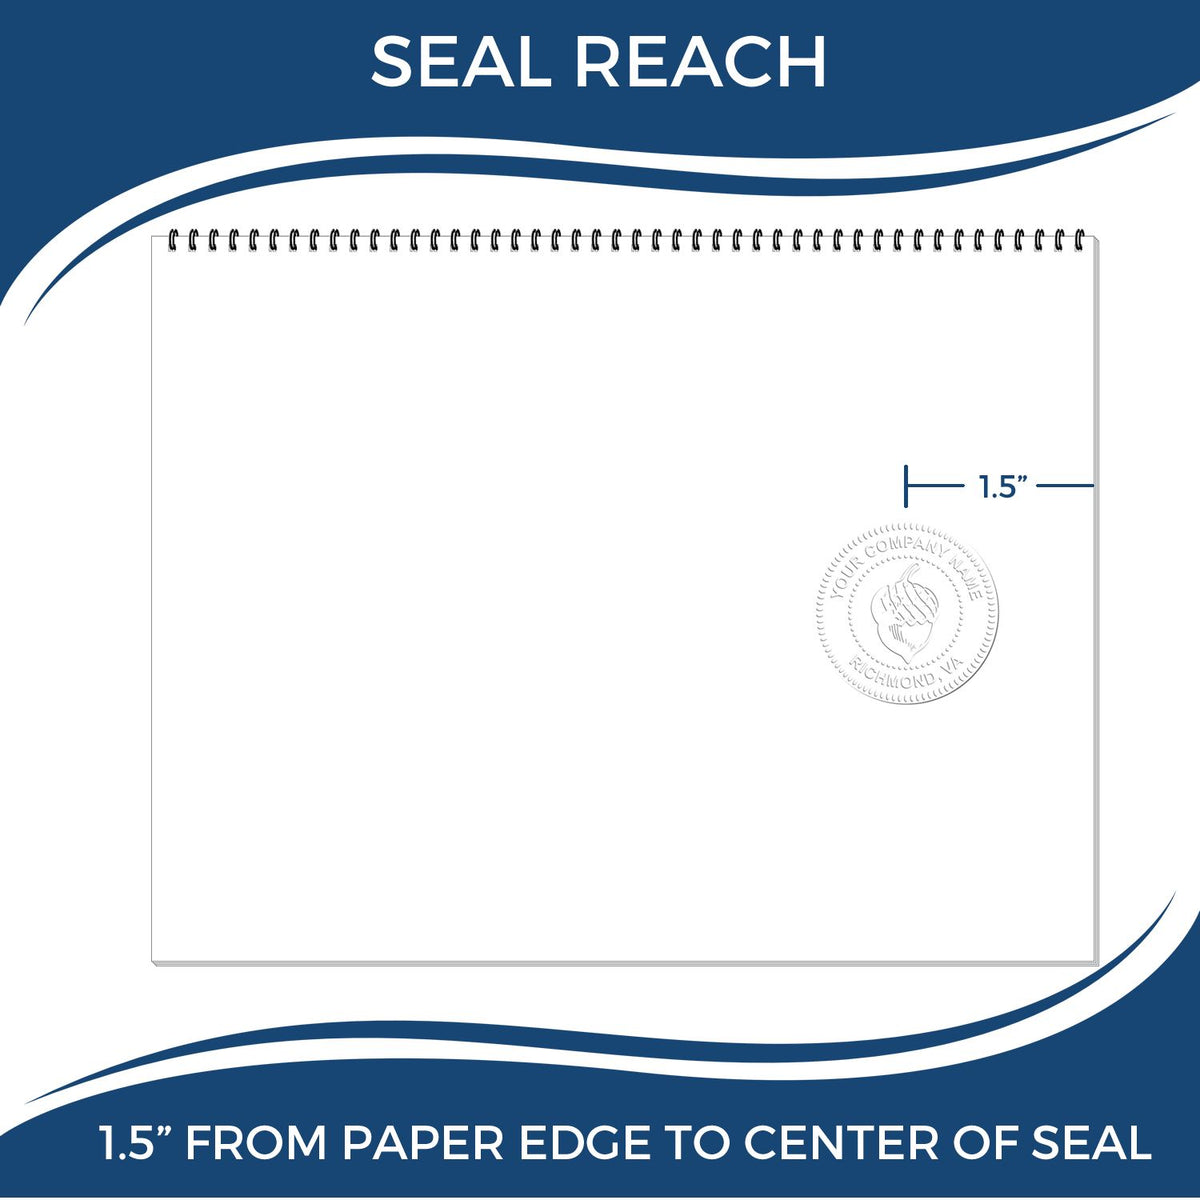 An infographic showing the seal reach which is represented by a ruler and a miniature seal image of the Hybrid Maine Engineer Seal